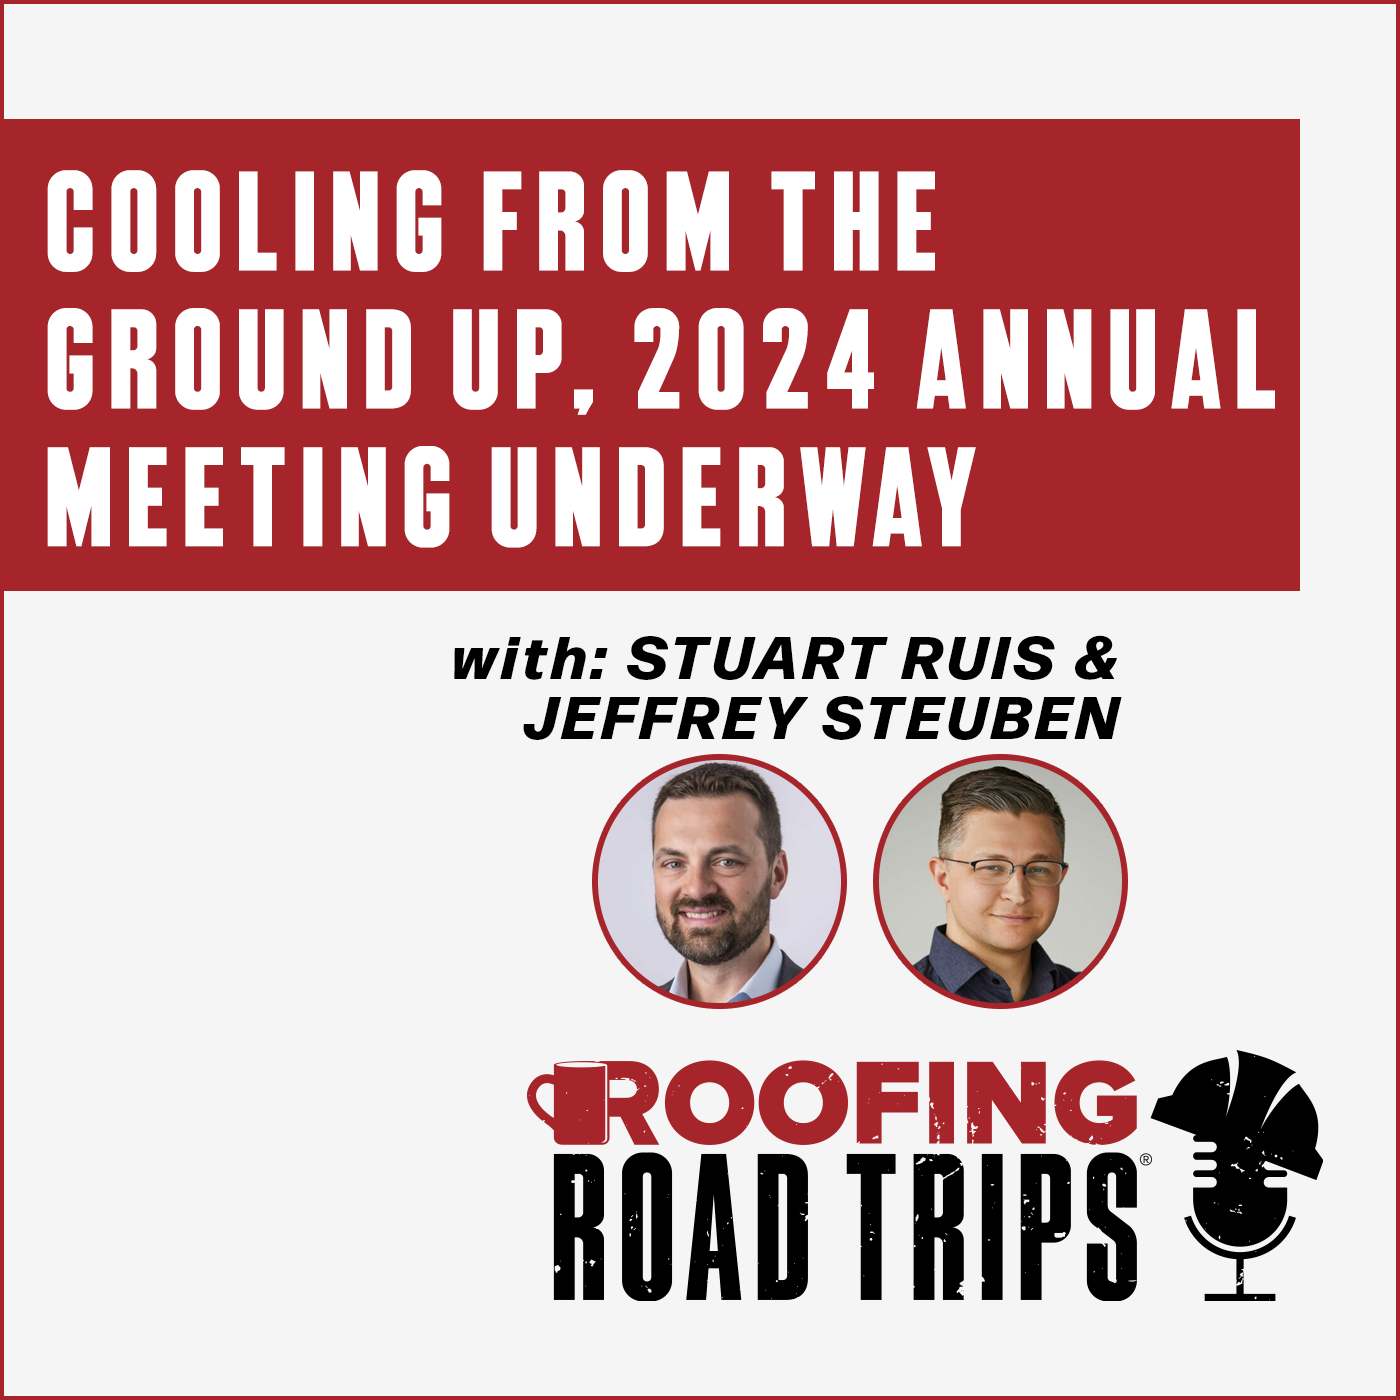 Jeffrey Steuben & Stuart Ruis - Cooling from the Ground Up, 2024 Annual Meeting Underway